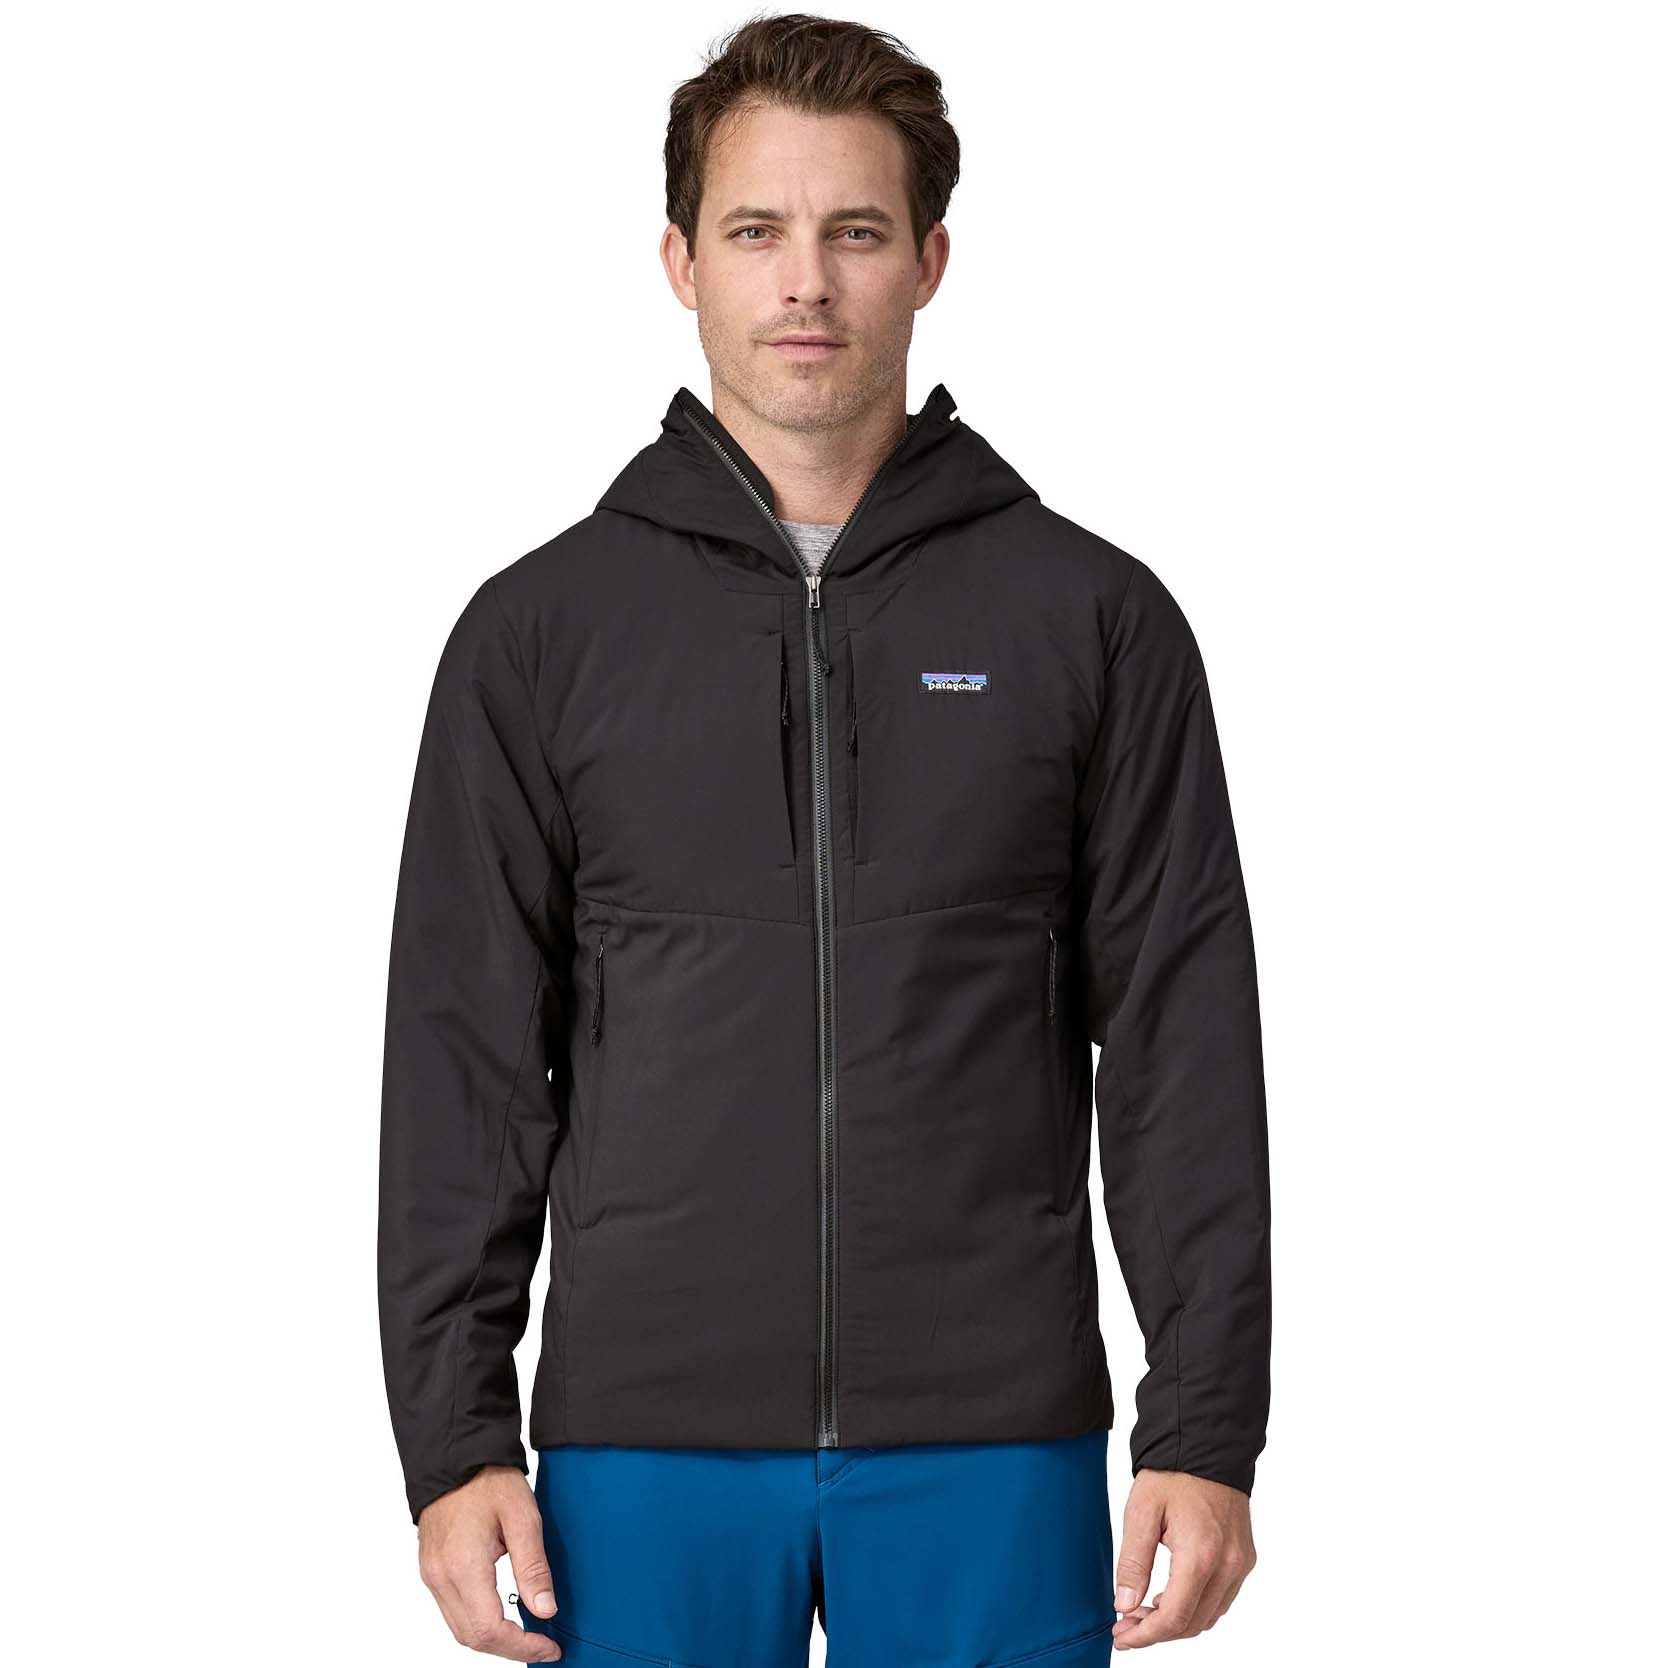 Patagonia Nano-Air Hoody Men's Insulated Jacket | Absolute-Snow